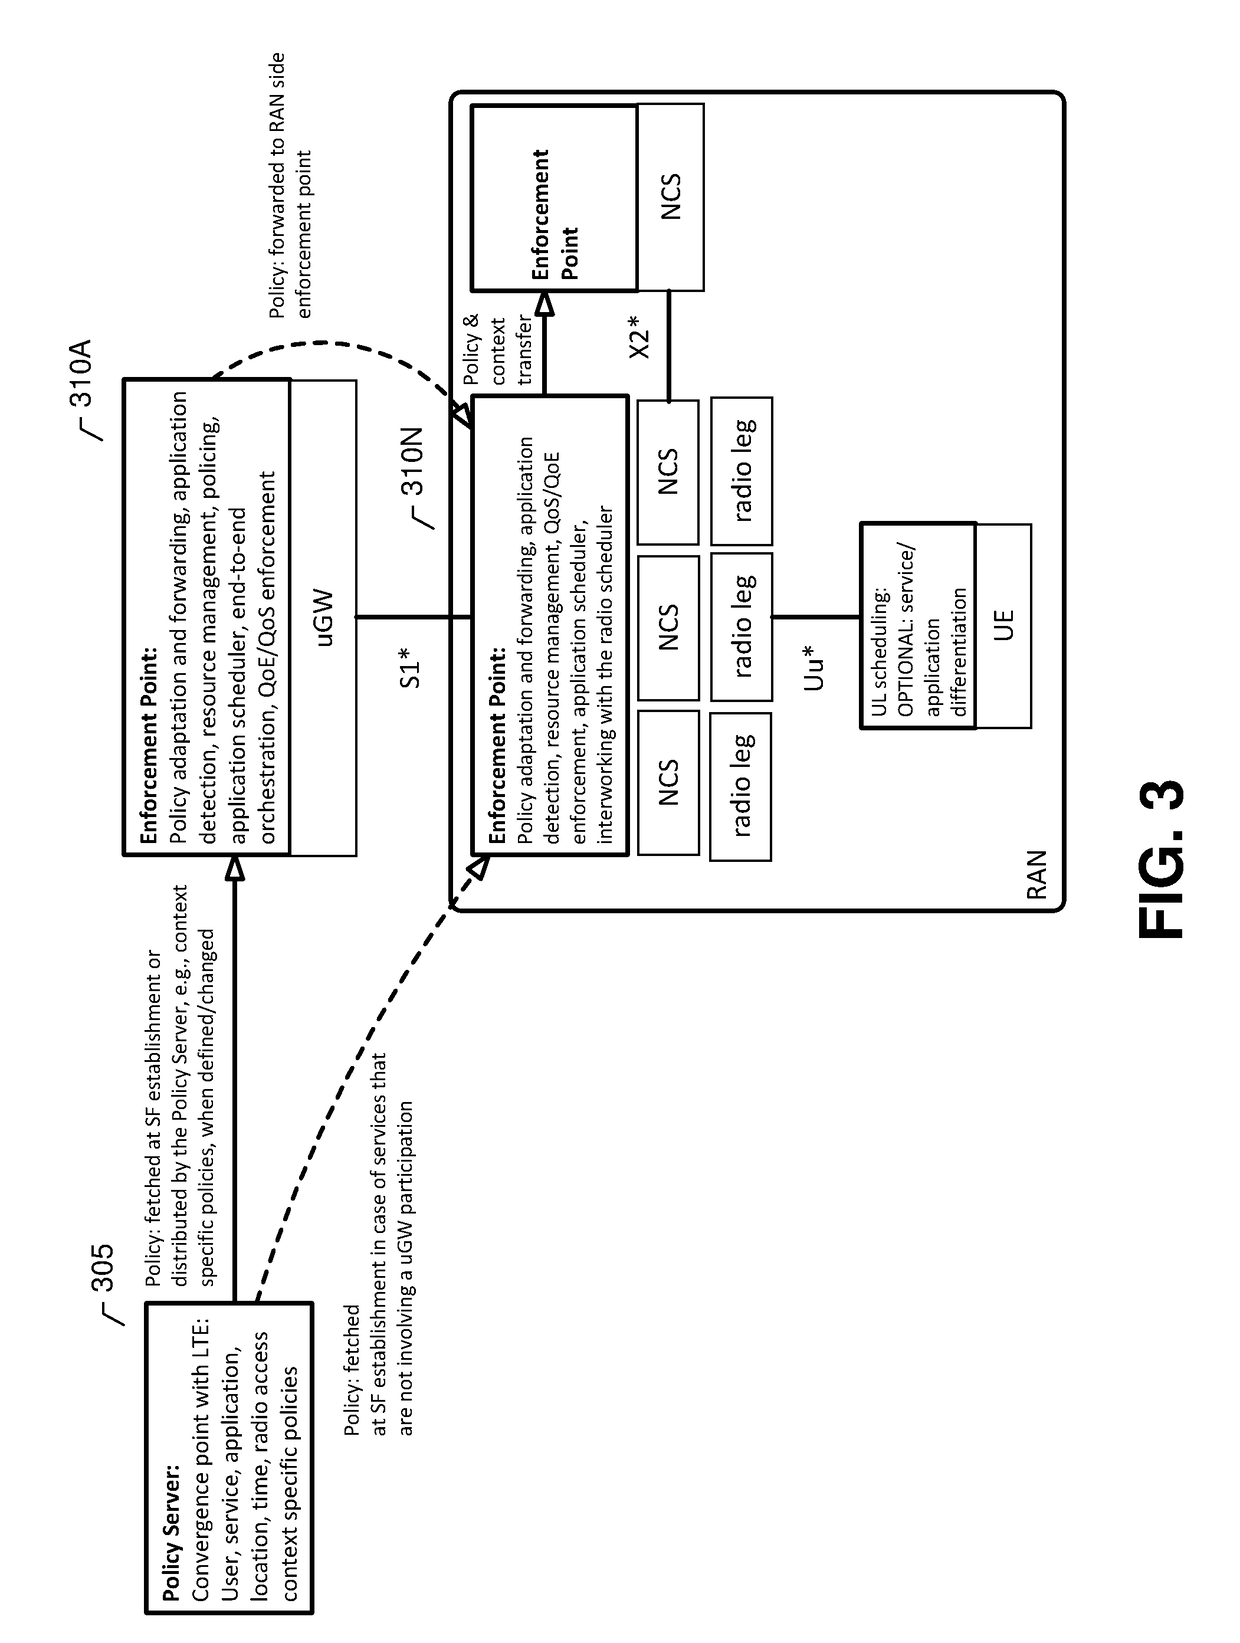 METHOD AND APPARATUS FOR END-TO-END QoS/QoE MANAGEMENT IN 5G SYSTEMS